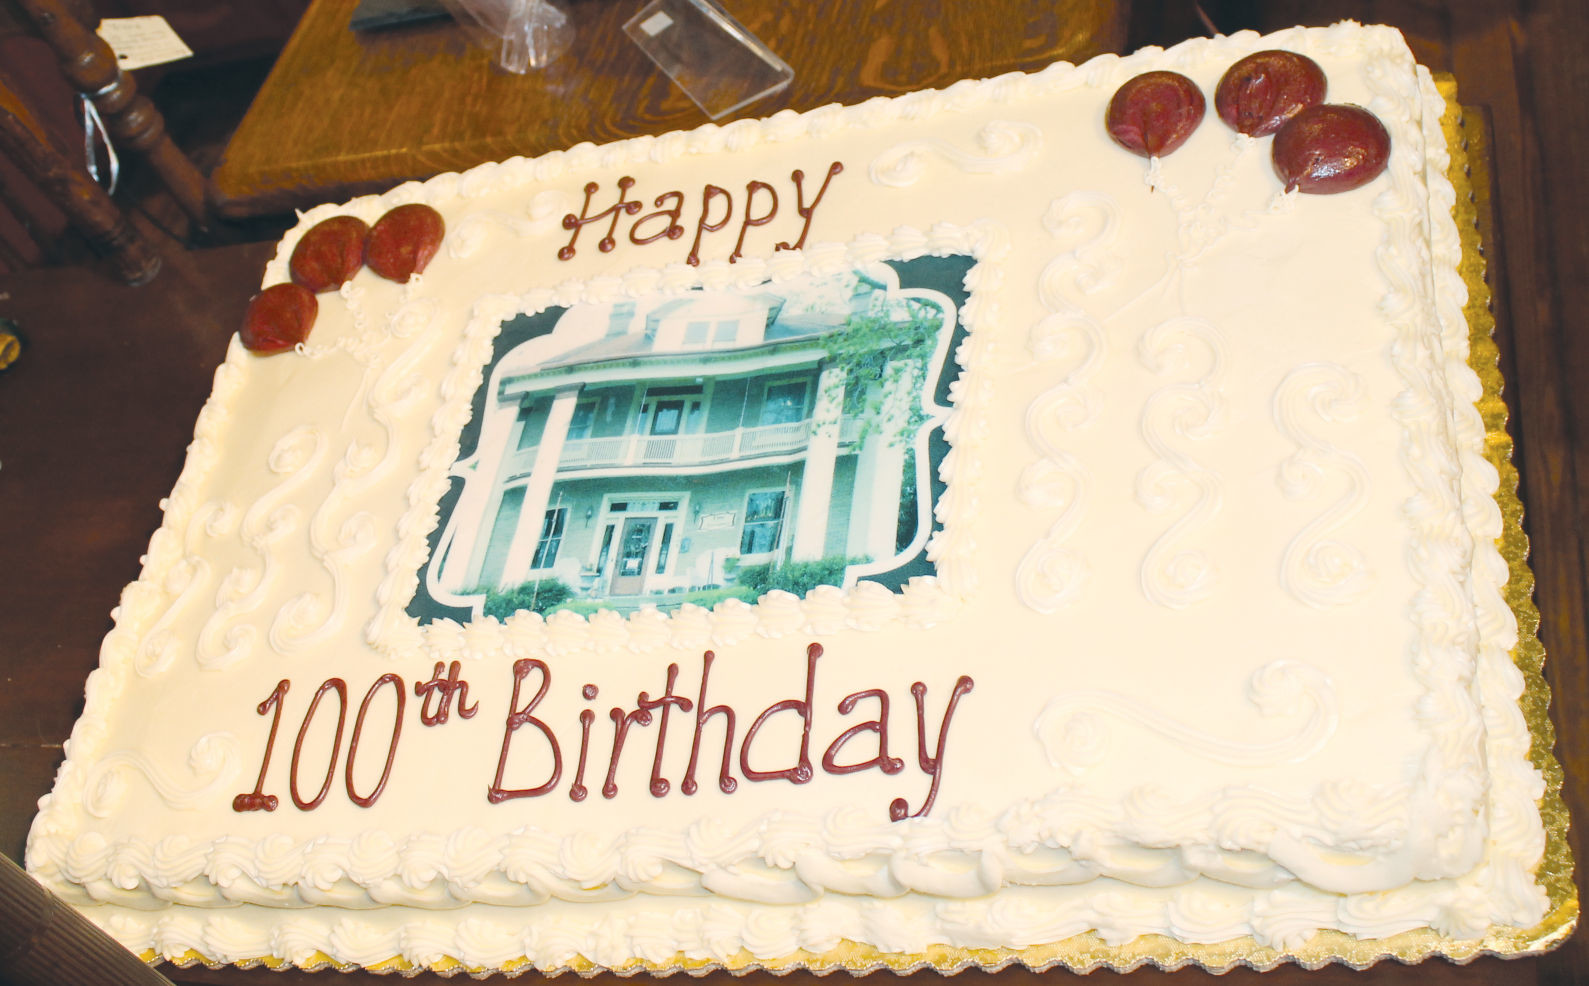 Descendants of Frank Merriman Fly celebrated the 100th anniversary with a decorative cake.